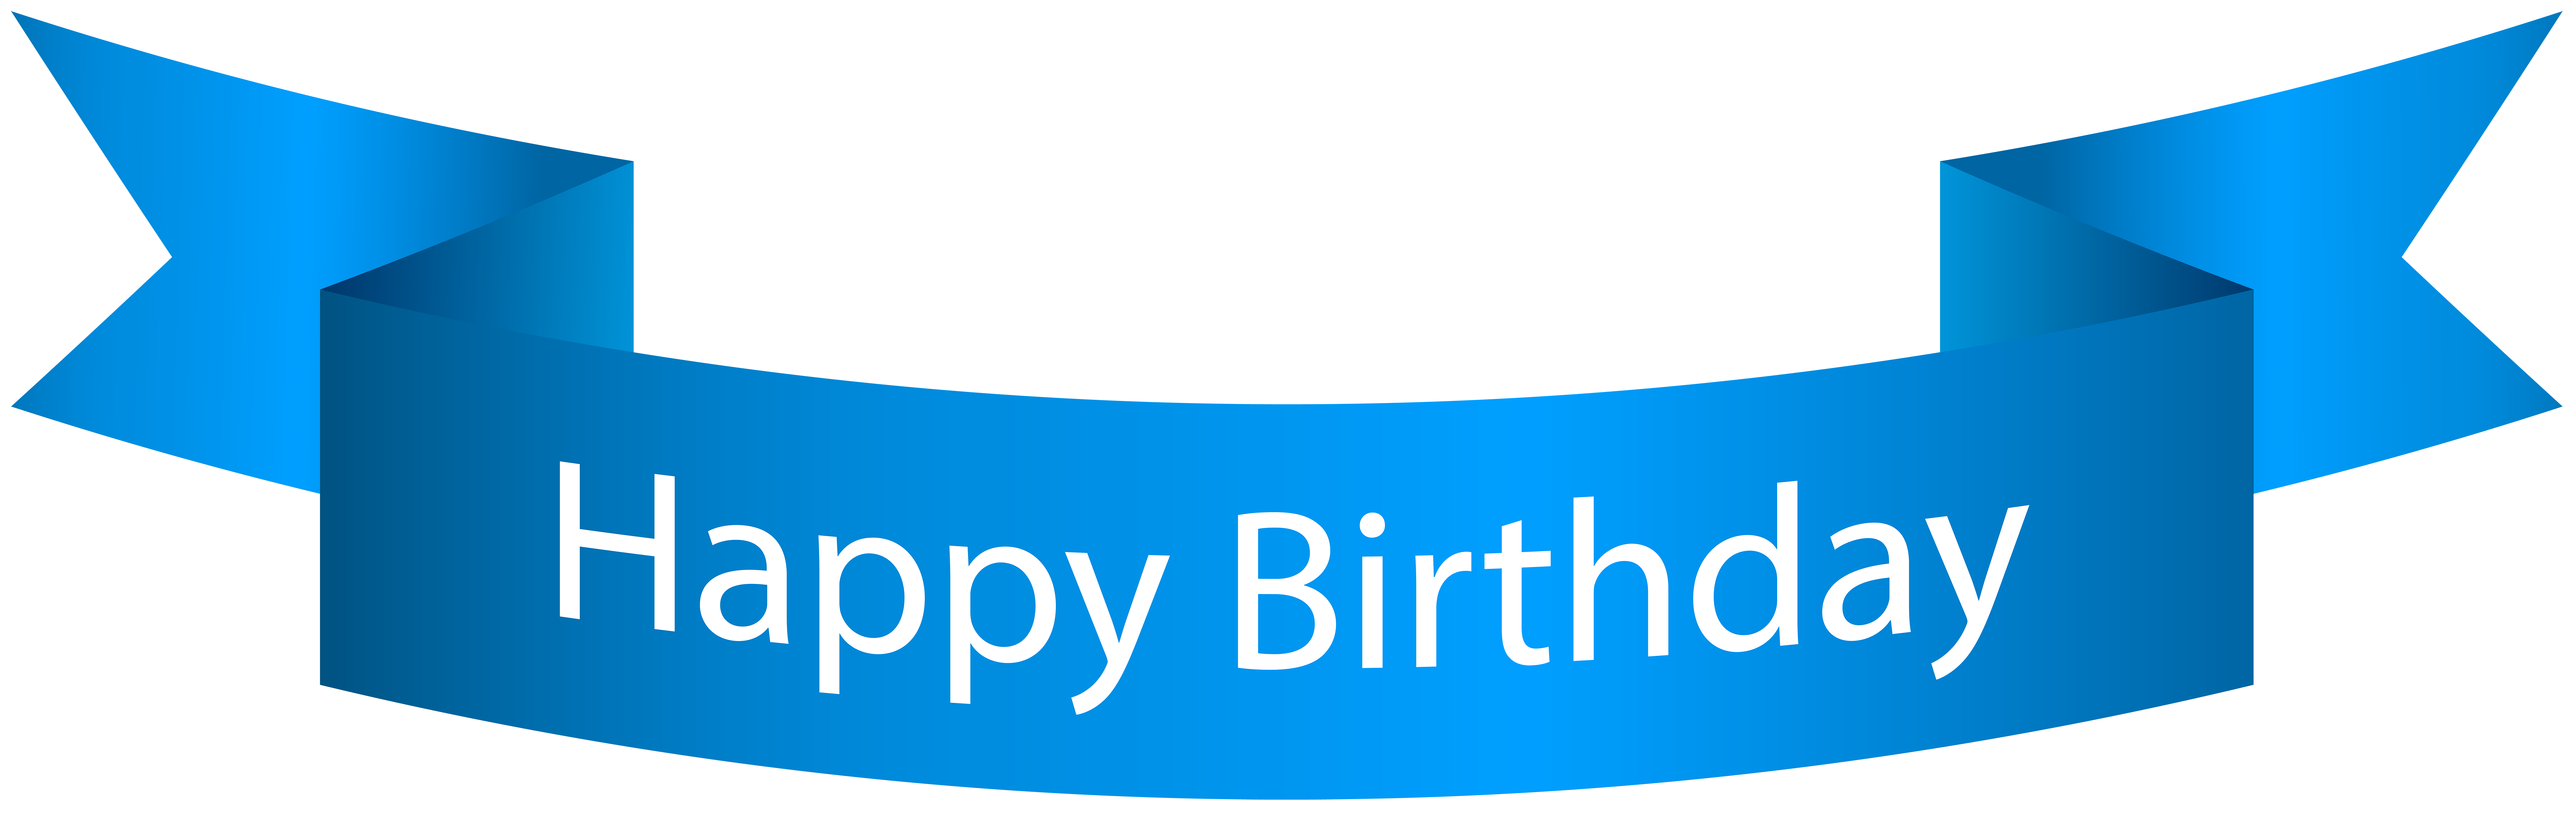 Happy Birthday Blue Banner PNG Clip Art Image Quality Image And Transparent PNG Free Clipart